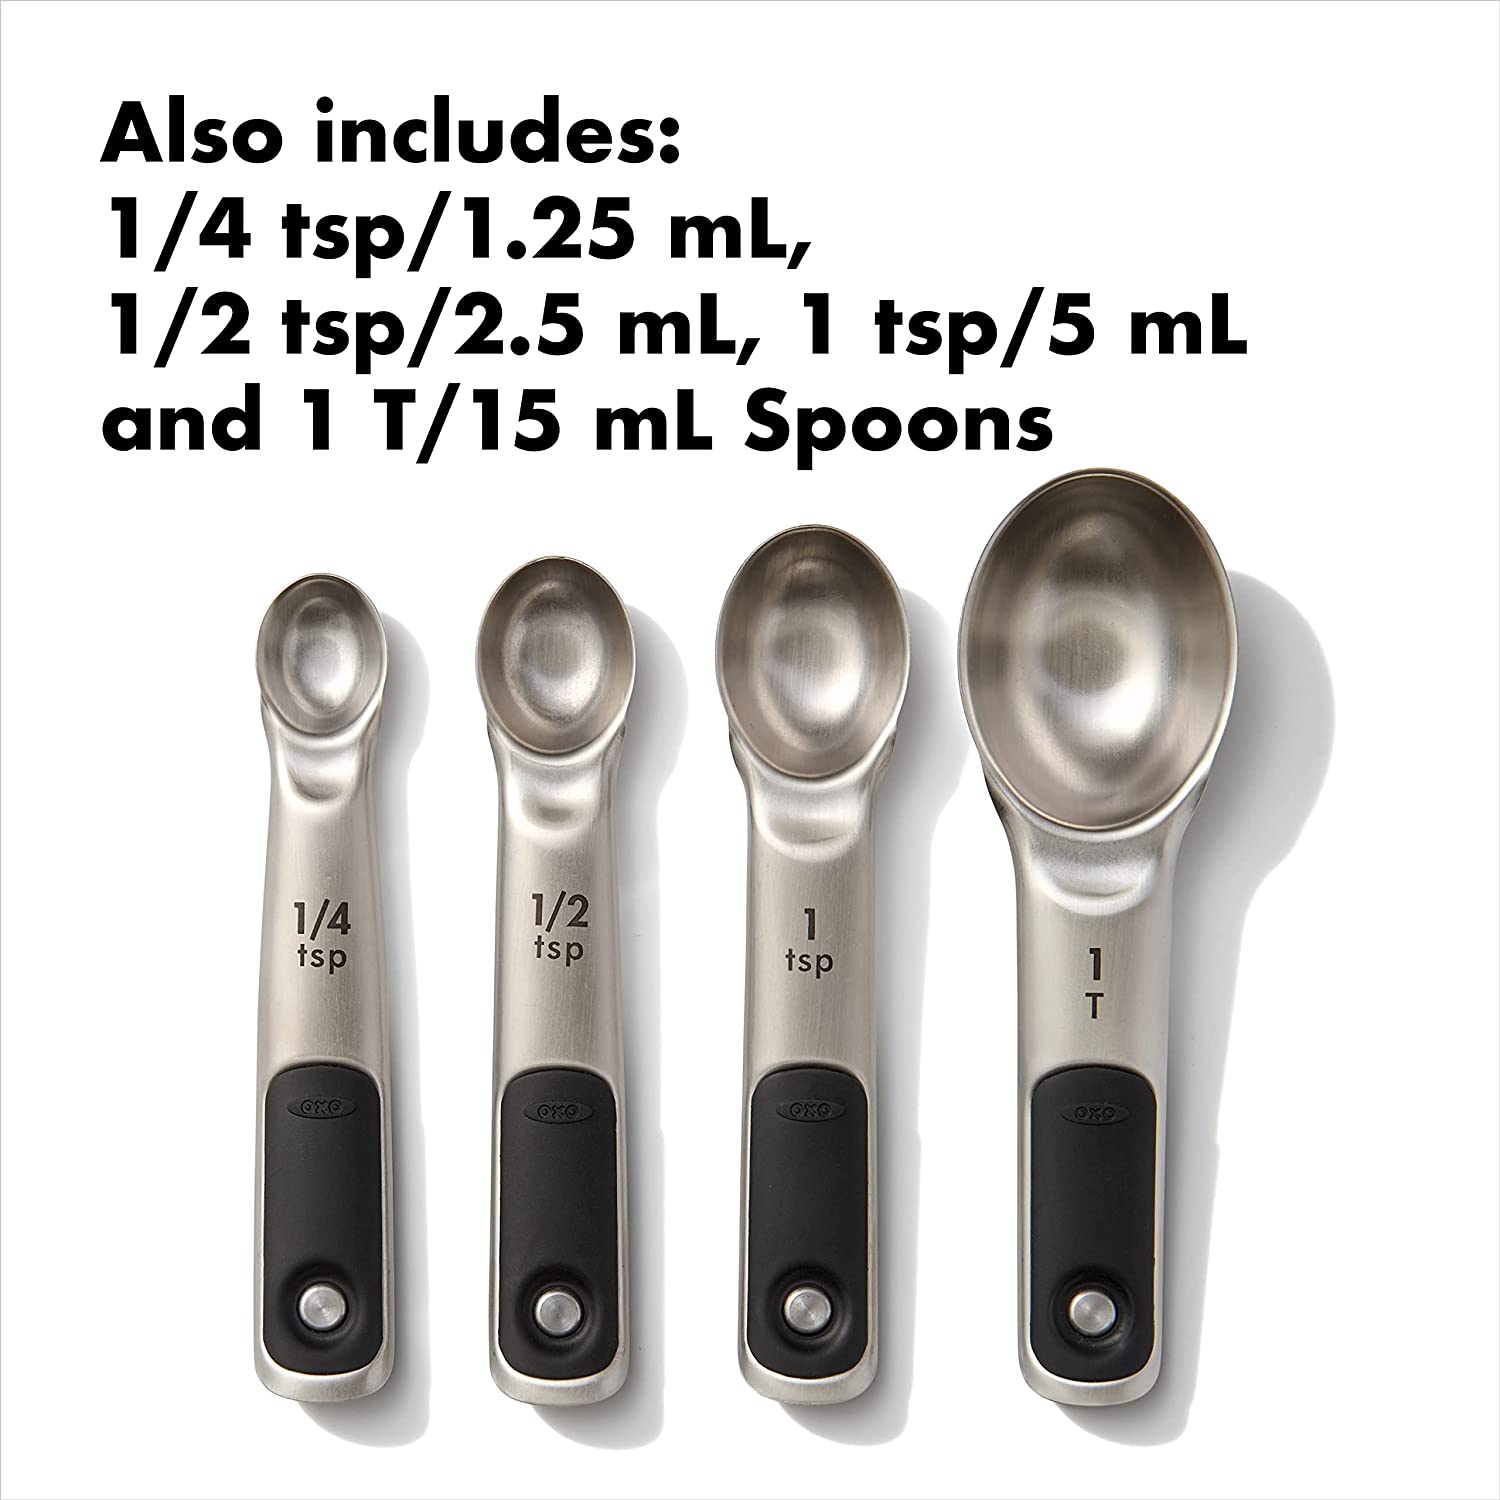 OXO Good Grips 8 Piece Stainless Steel Measuring Cups and Spoons